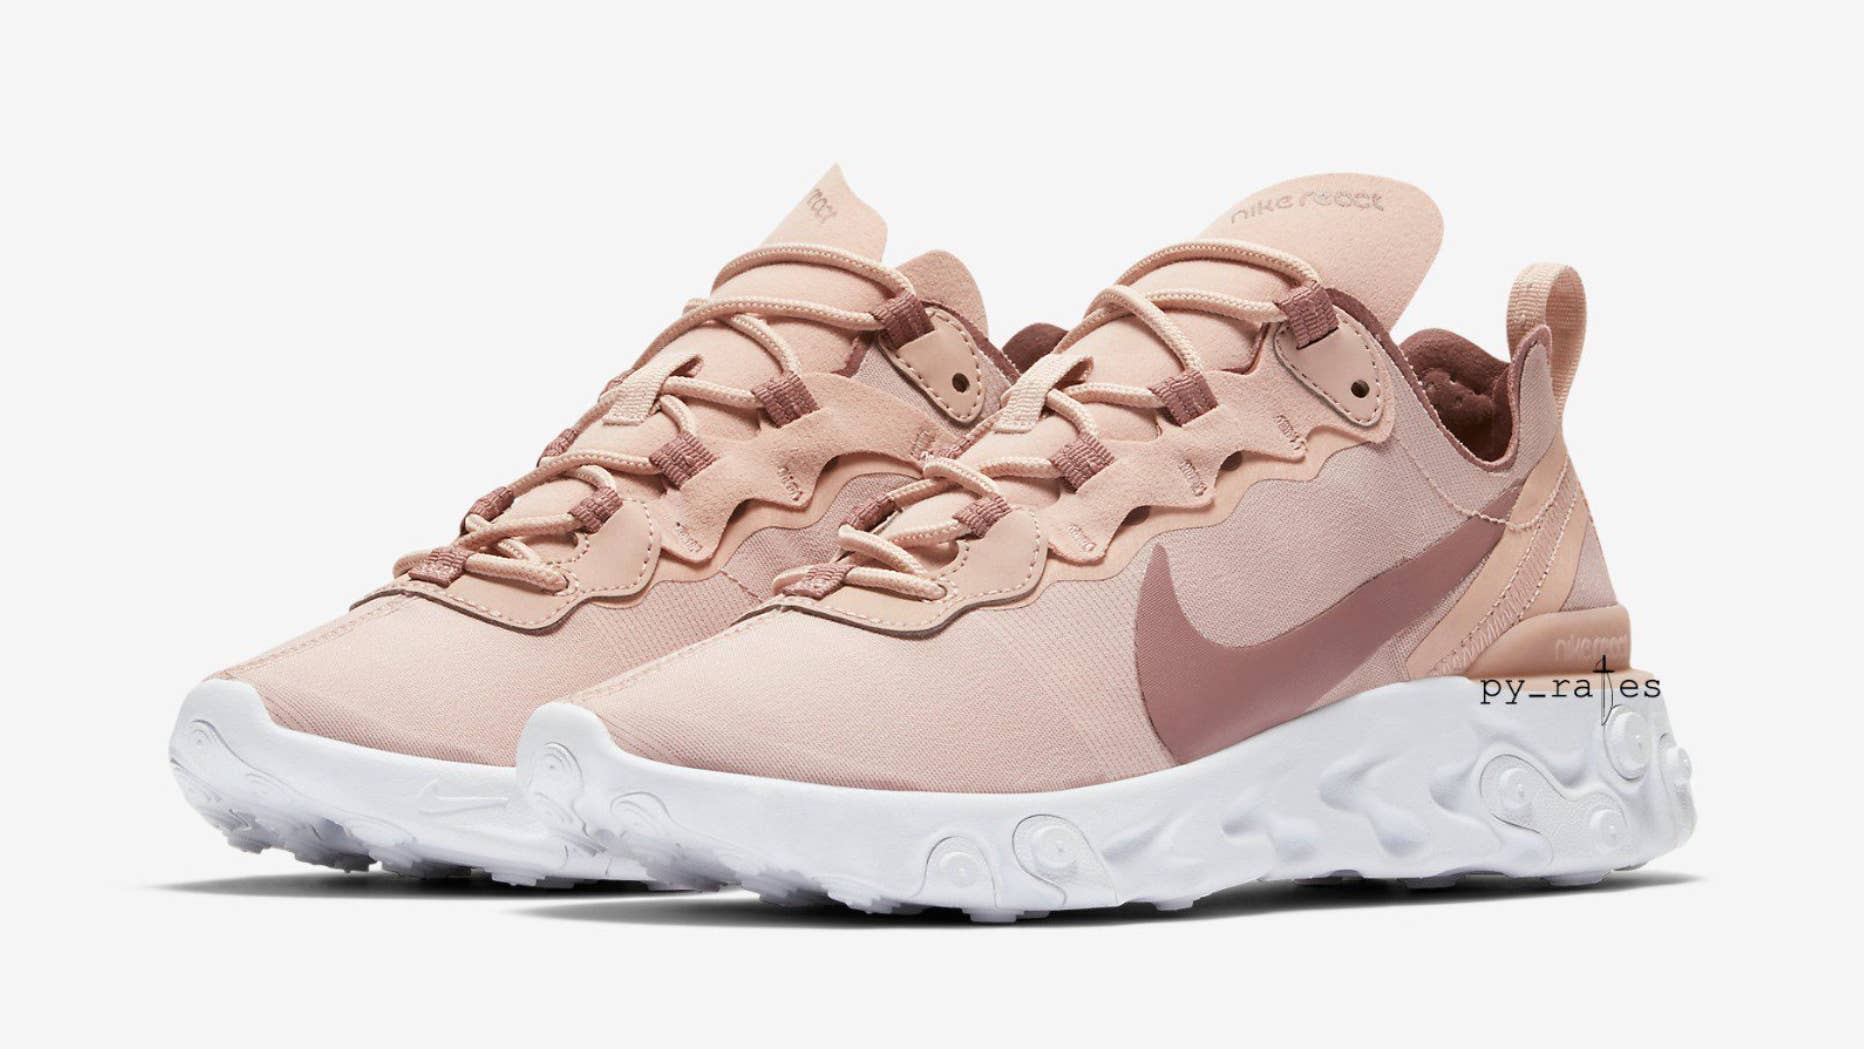 Another Colorway of the React Element 55 | Complex